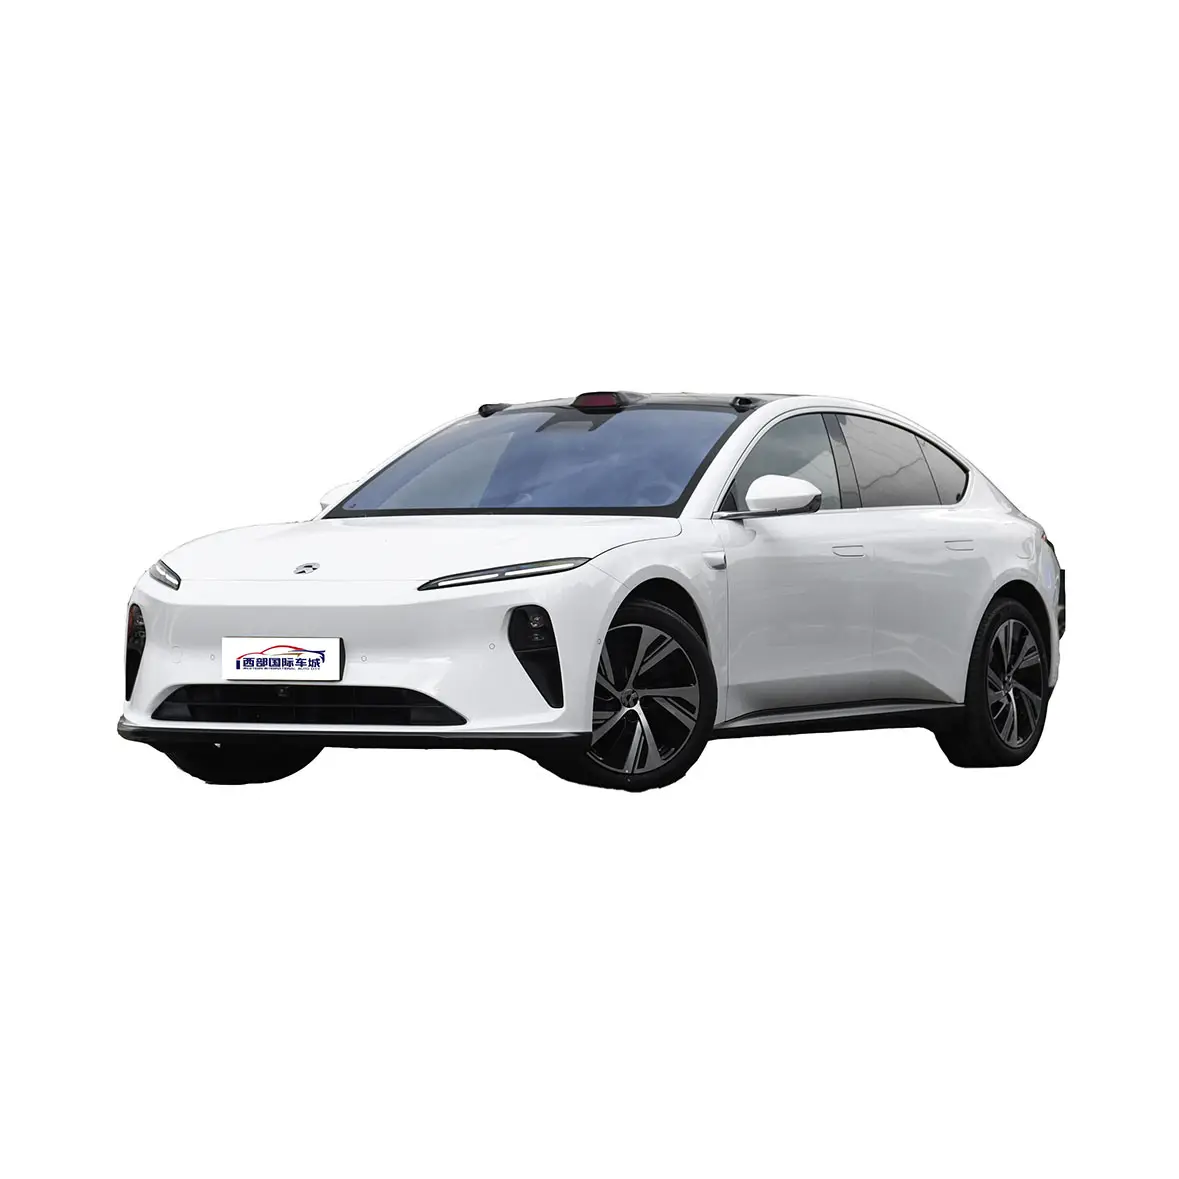 Professional Factory's Weilaiet5 Nio Ev Car Home Vehicle with Innovative Electric Motor New Energy Vehicle